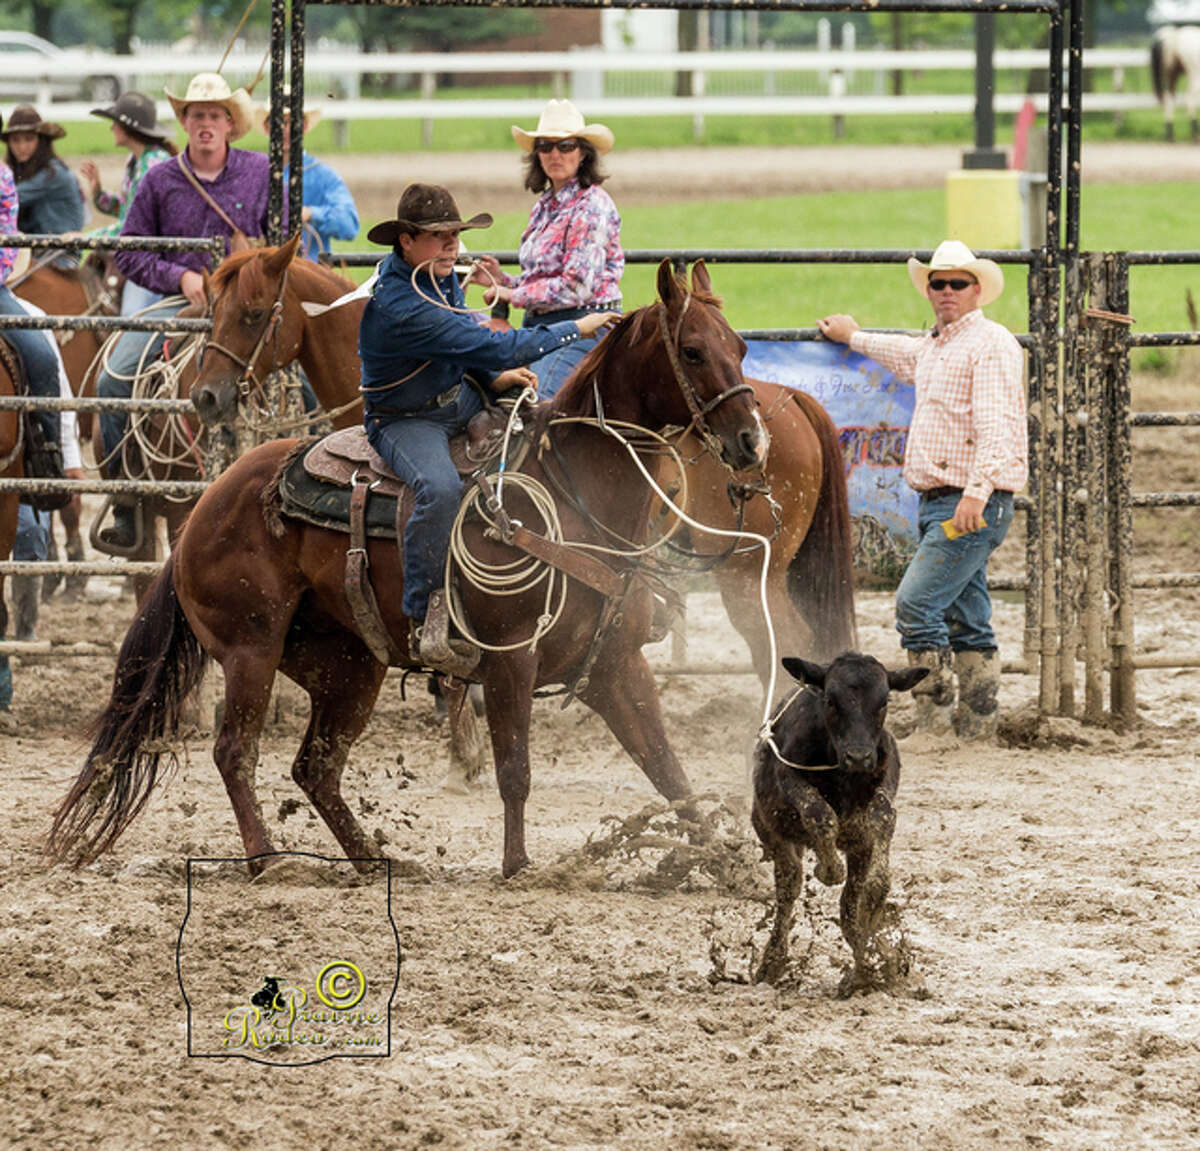 Tyler Manion, a Waverly High School sophomore, competes in a calf roping competition during the 2015 Illinois High School Rodeo Association season.